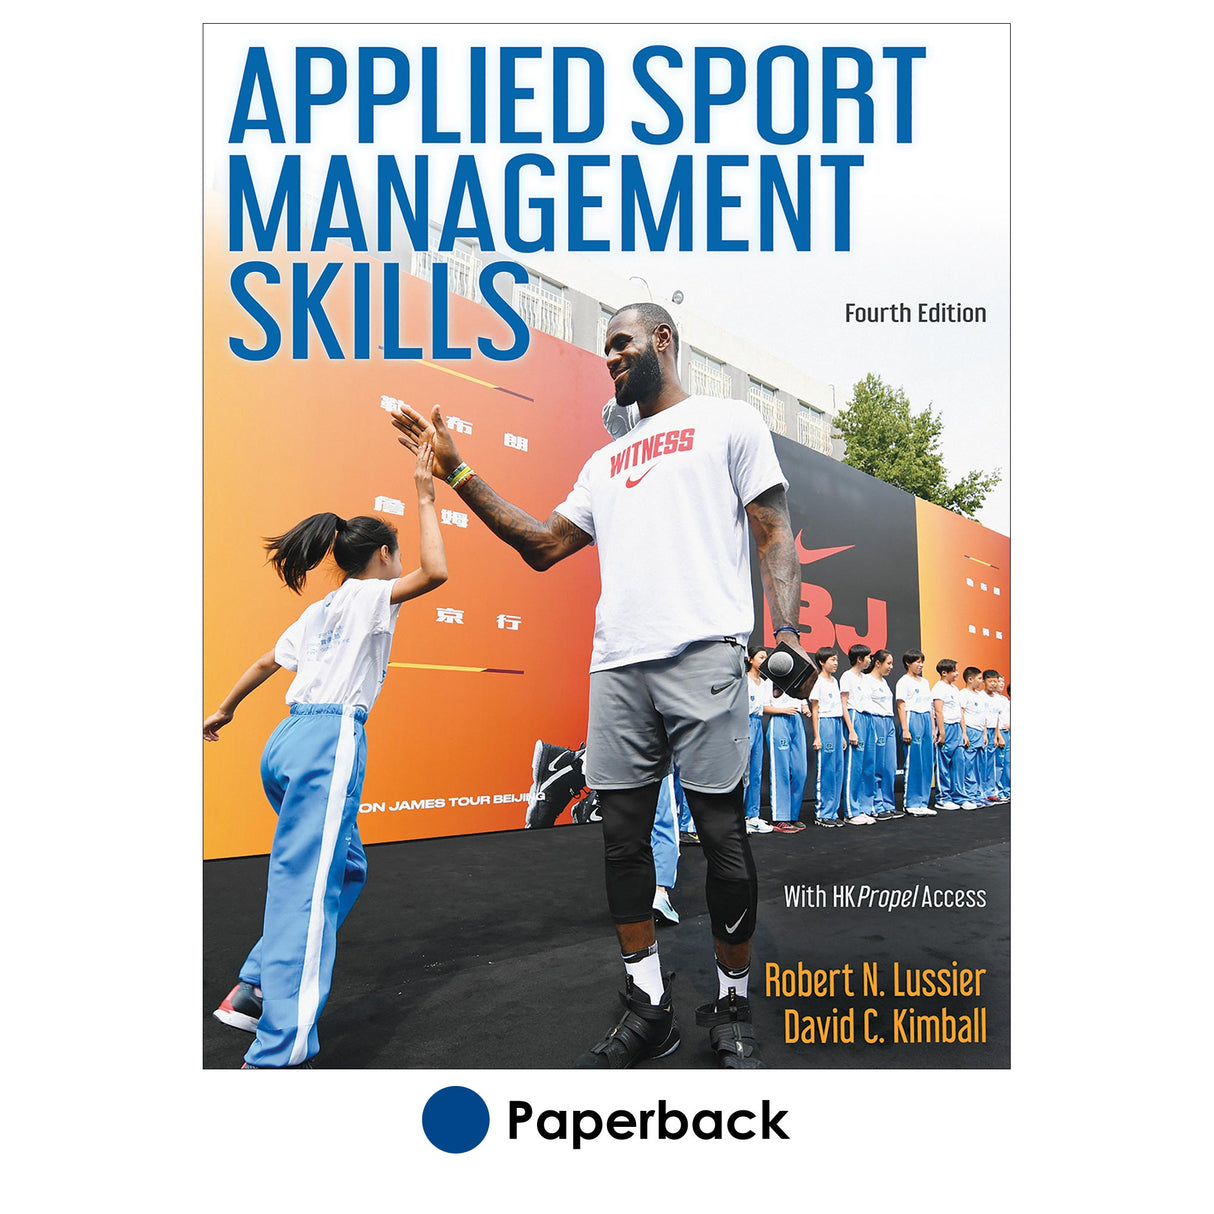 Applied Sport Management Skills 4th Edition With HKPropel Access